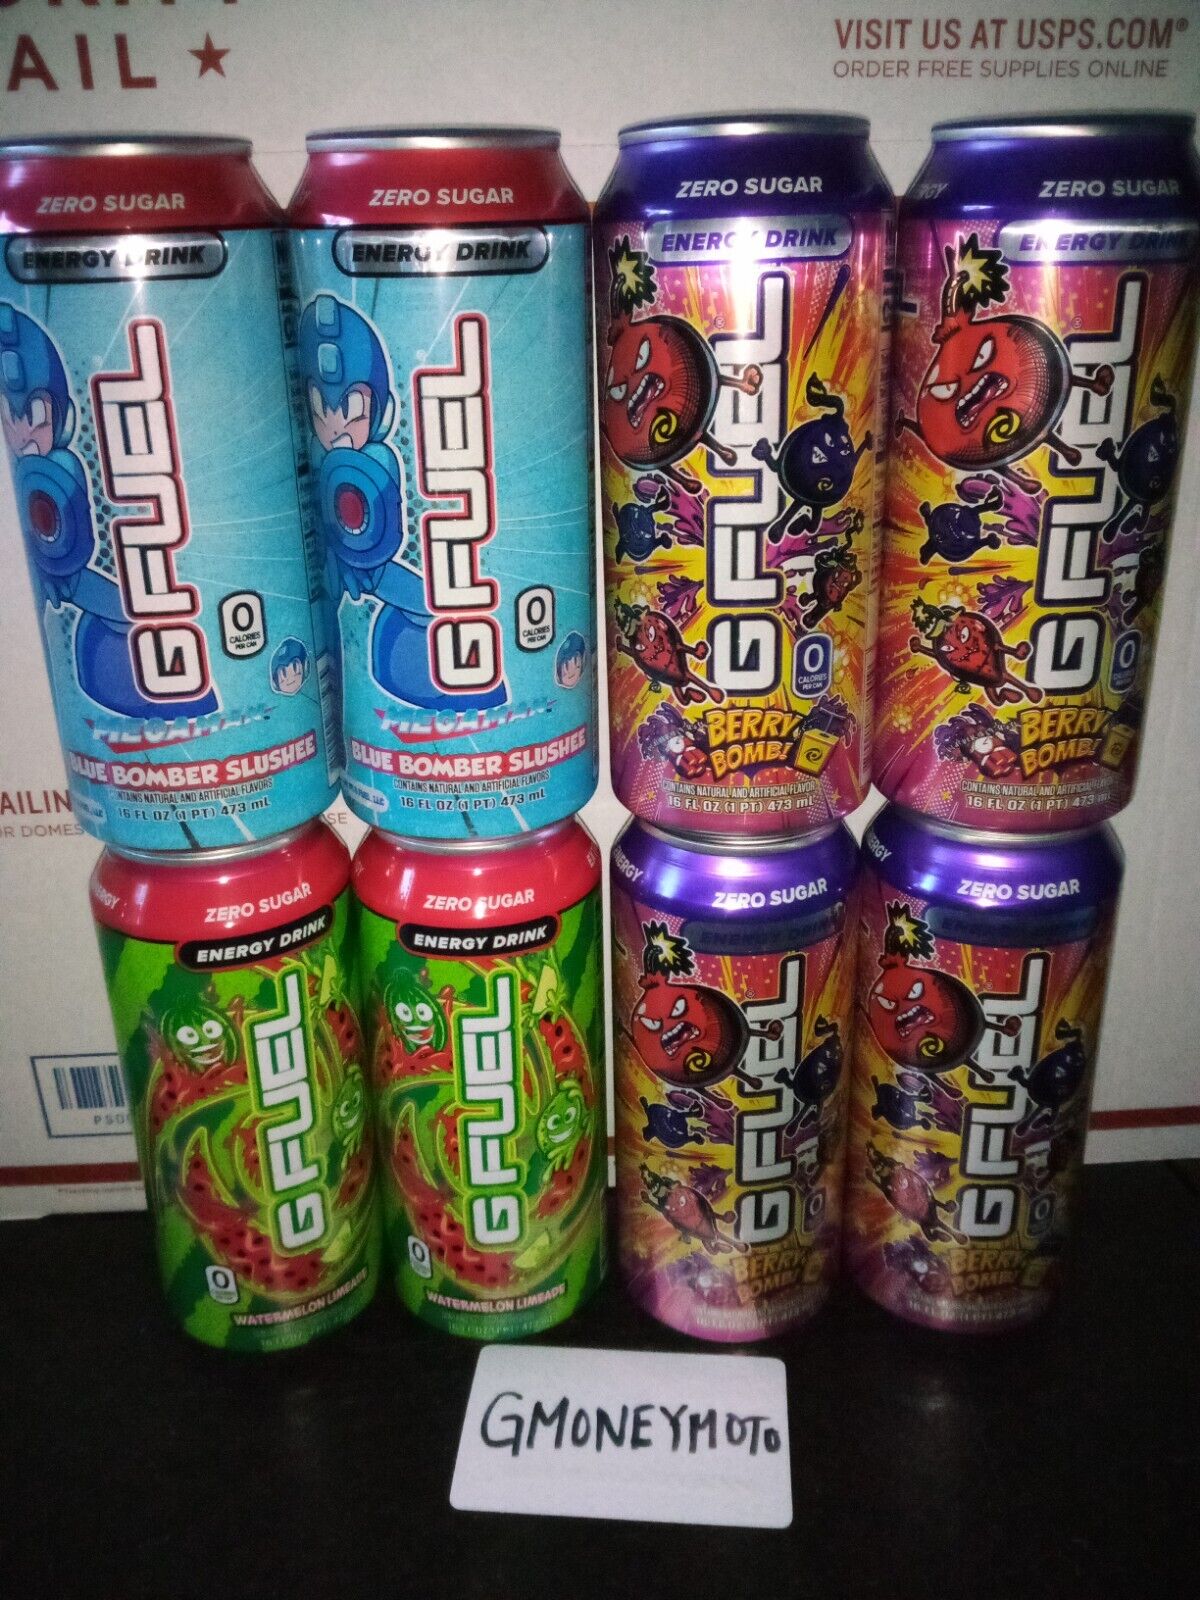 Limited Edition GFuel 16oz Energy Drink Cans 2 MegaMan 2 Watermelon 4 Berry Bomb